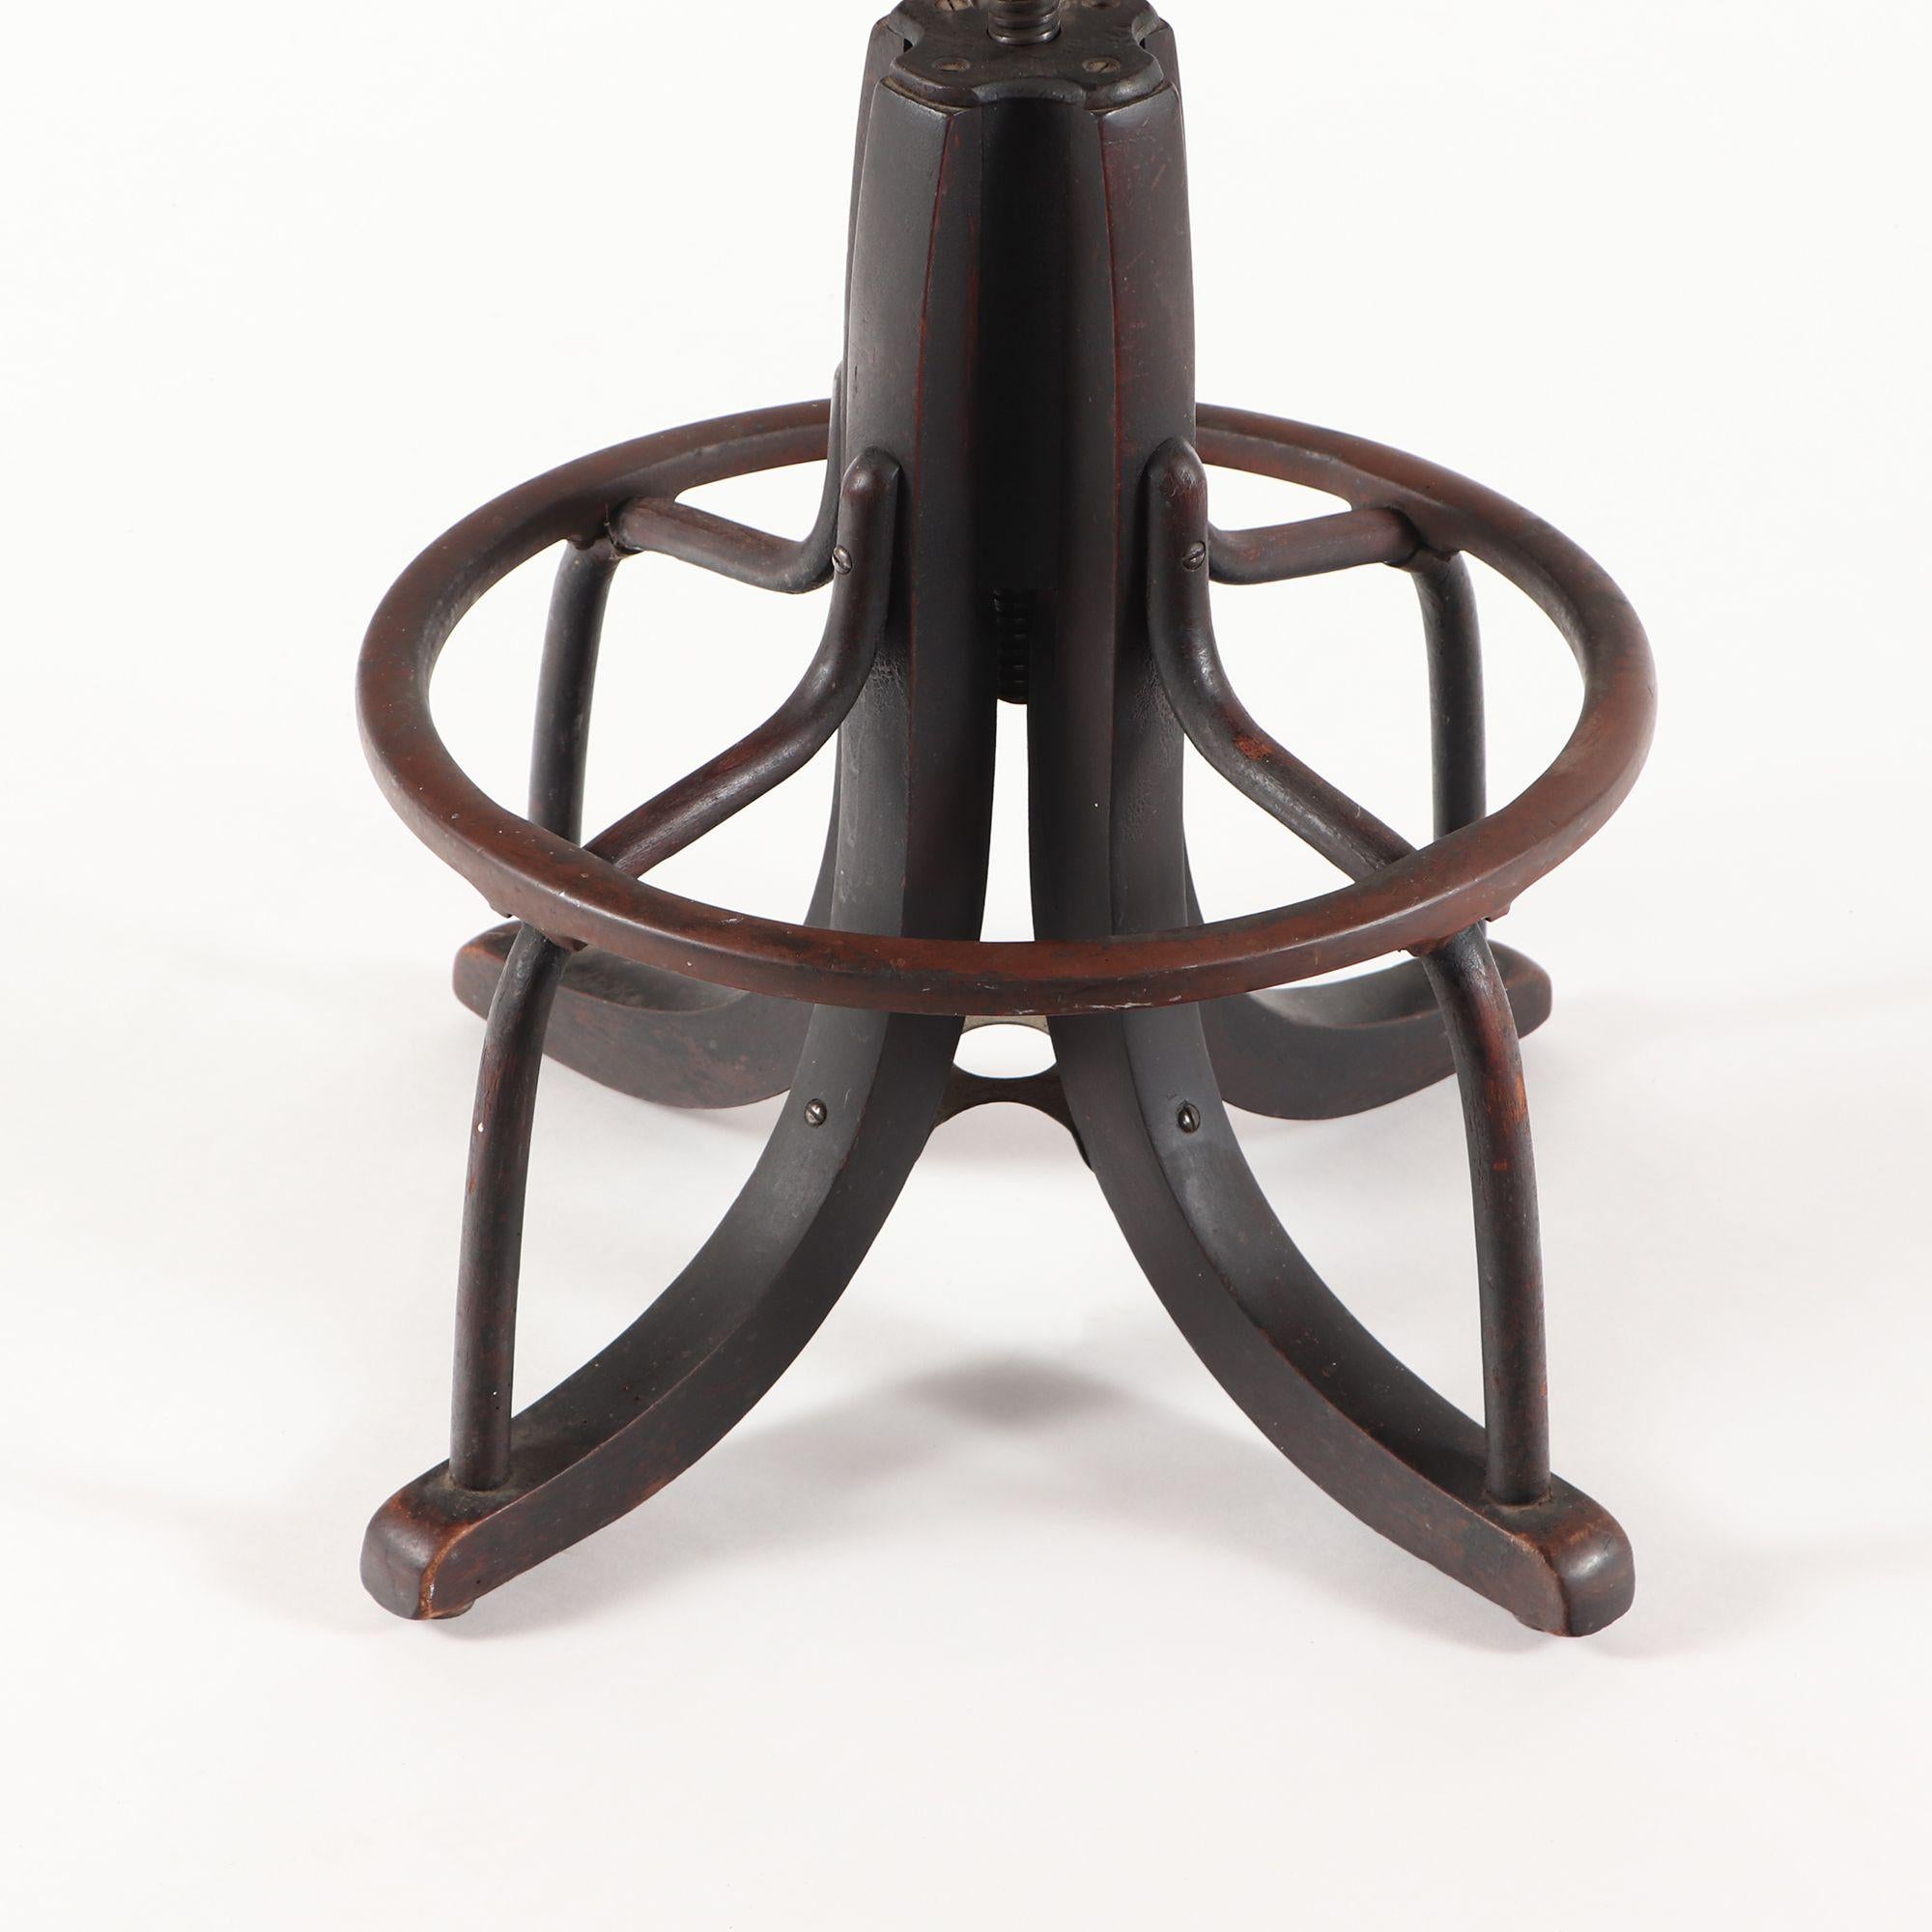 Cane Industrial Swivel Stool or Telephone Operator's Chair, circa 1930